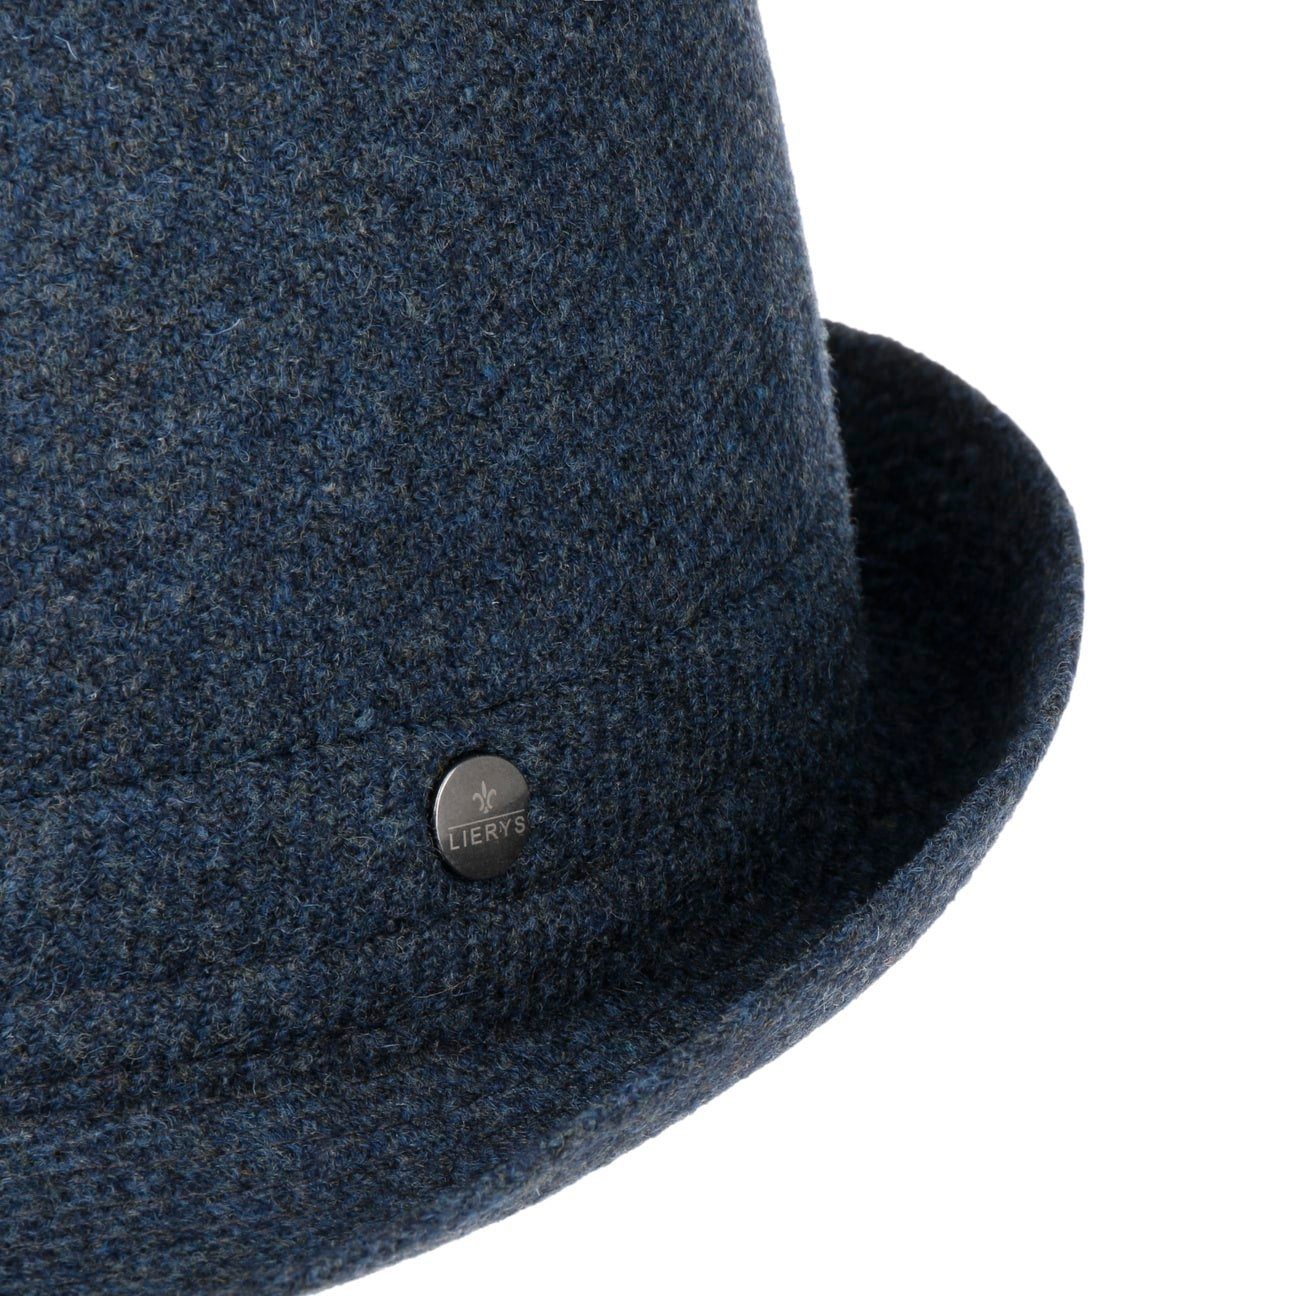 (1-St) Made blau Trilby Futter, Lierys mit Wolltrilby Italy in